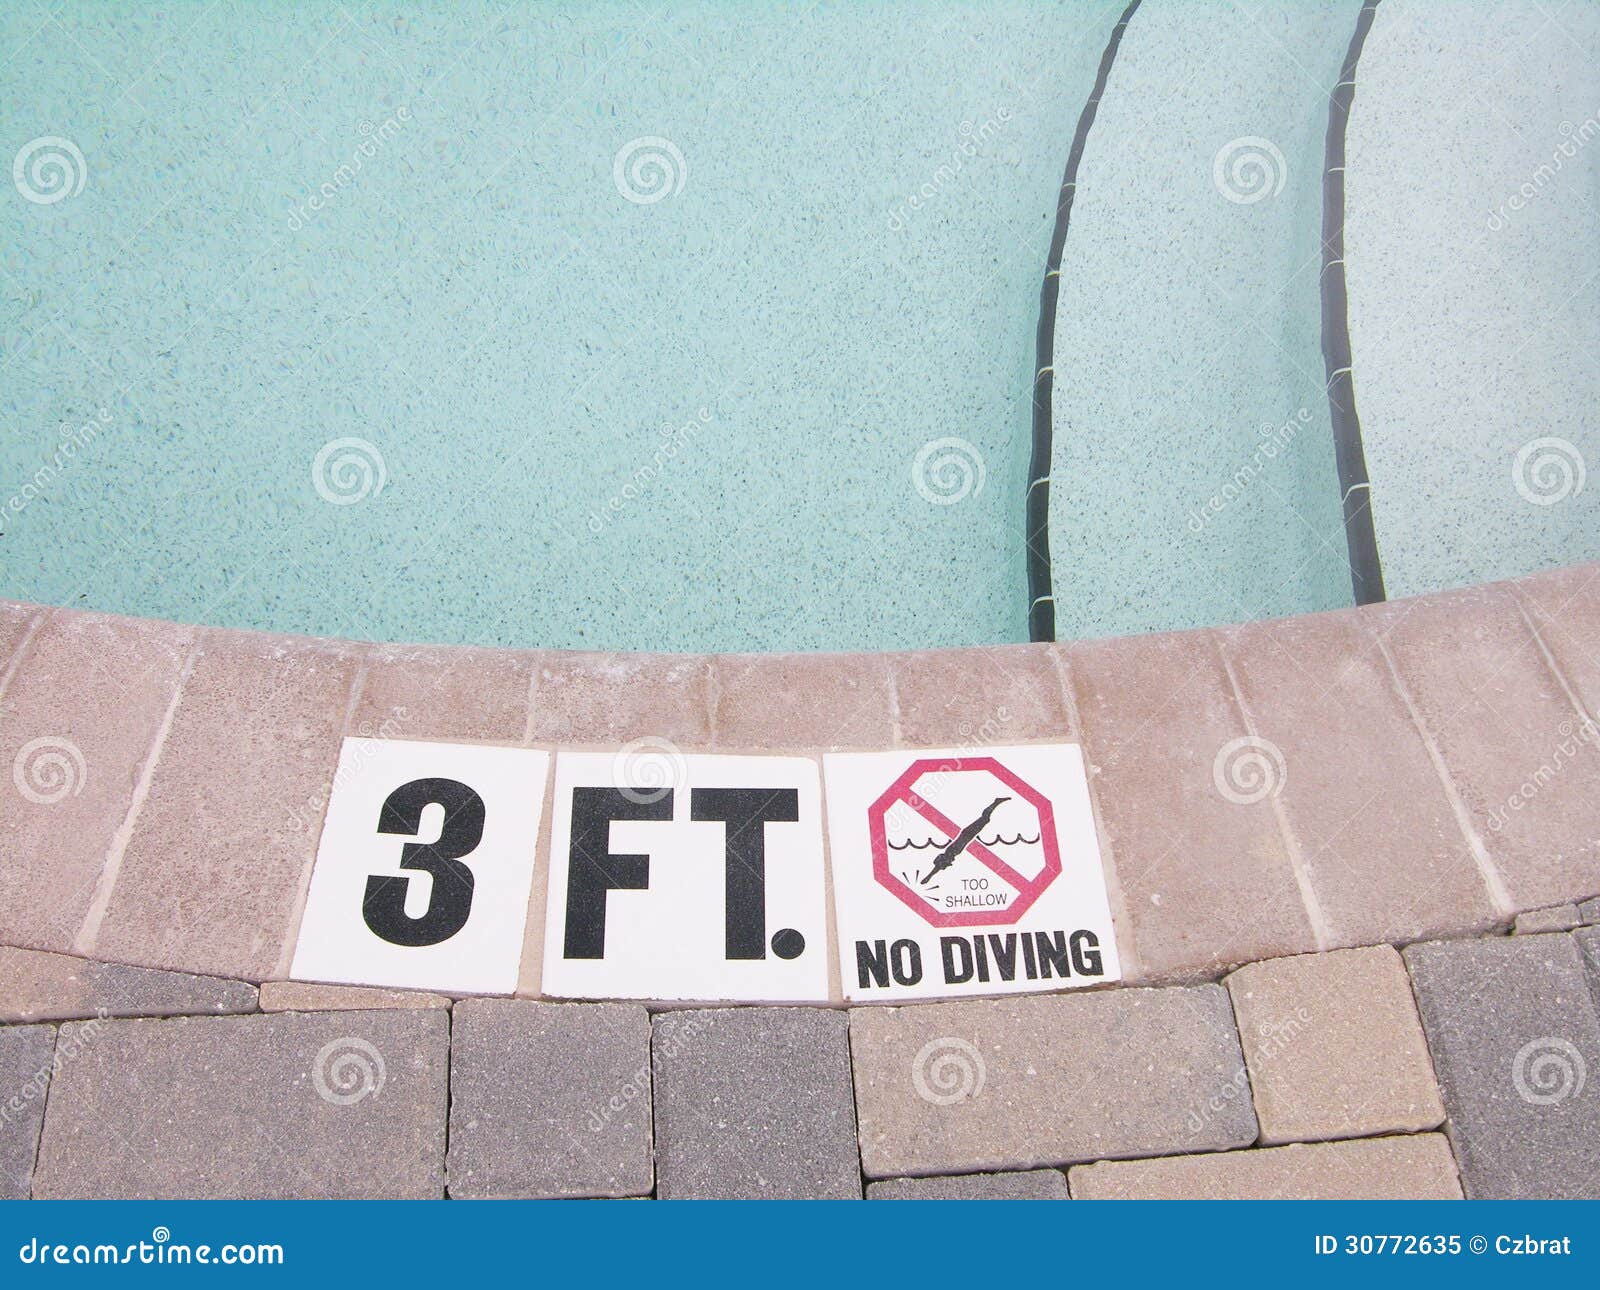 No Diving Stock Image Image Of Concept Shallow Steps 30772635